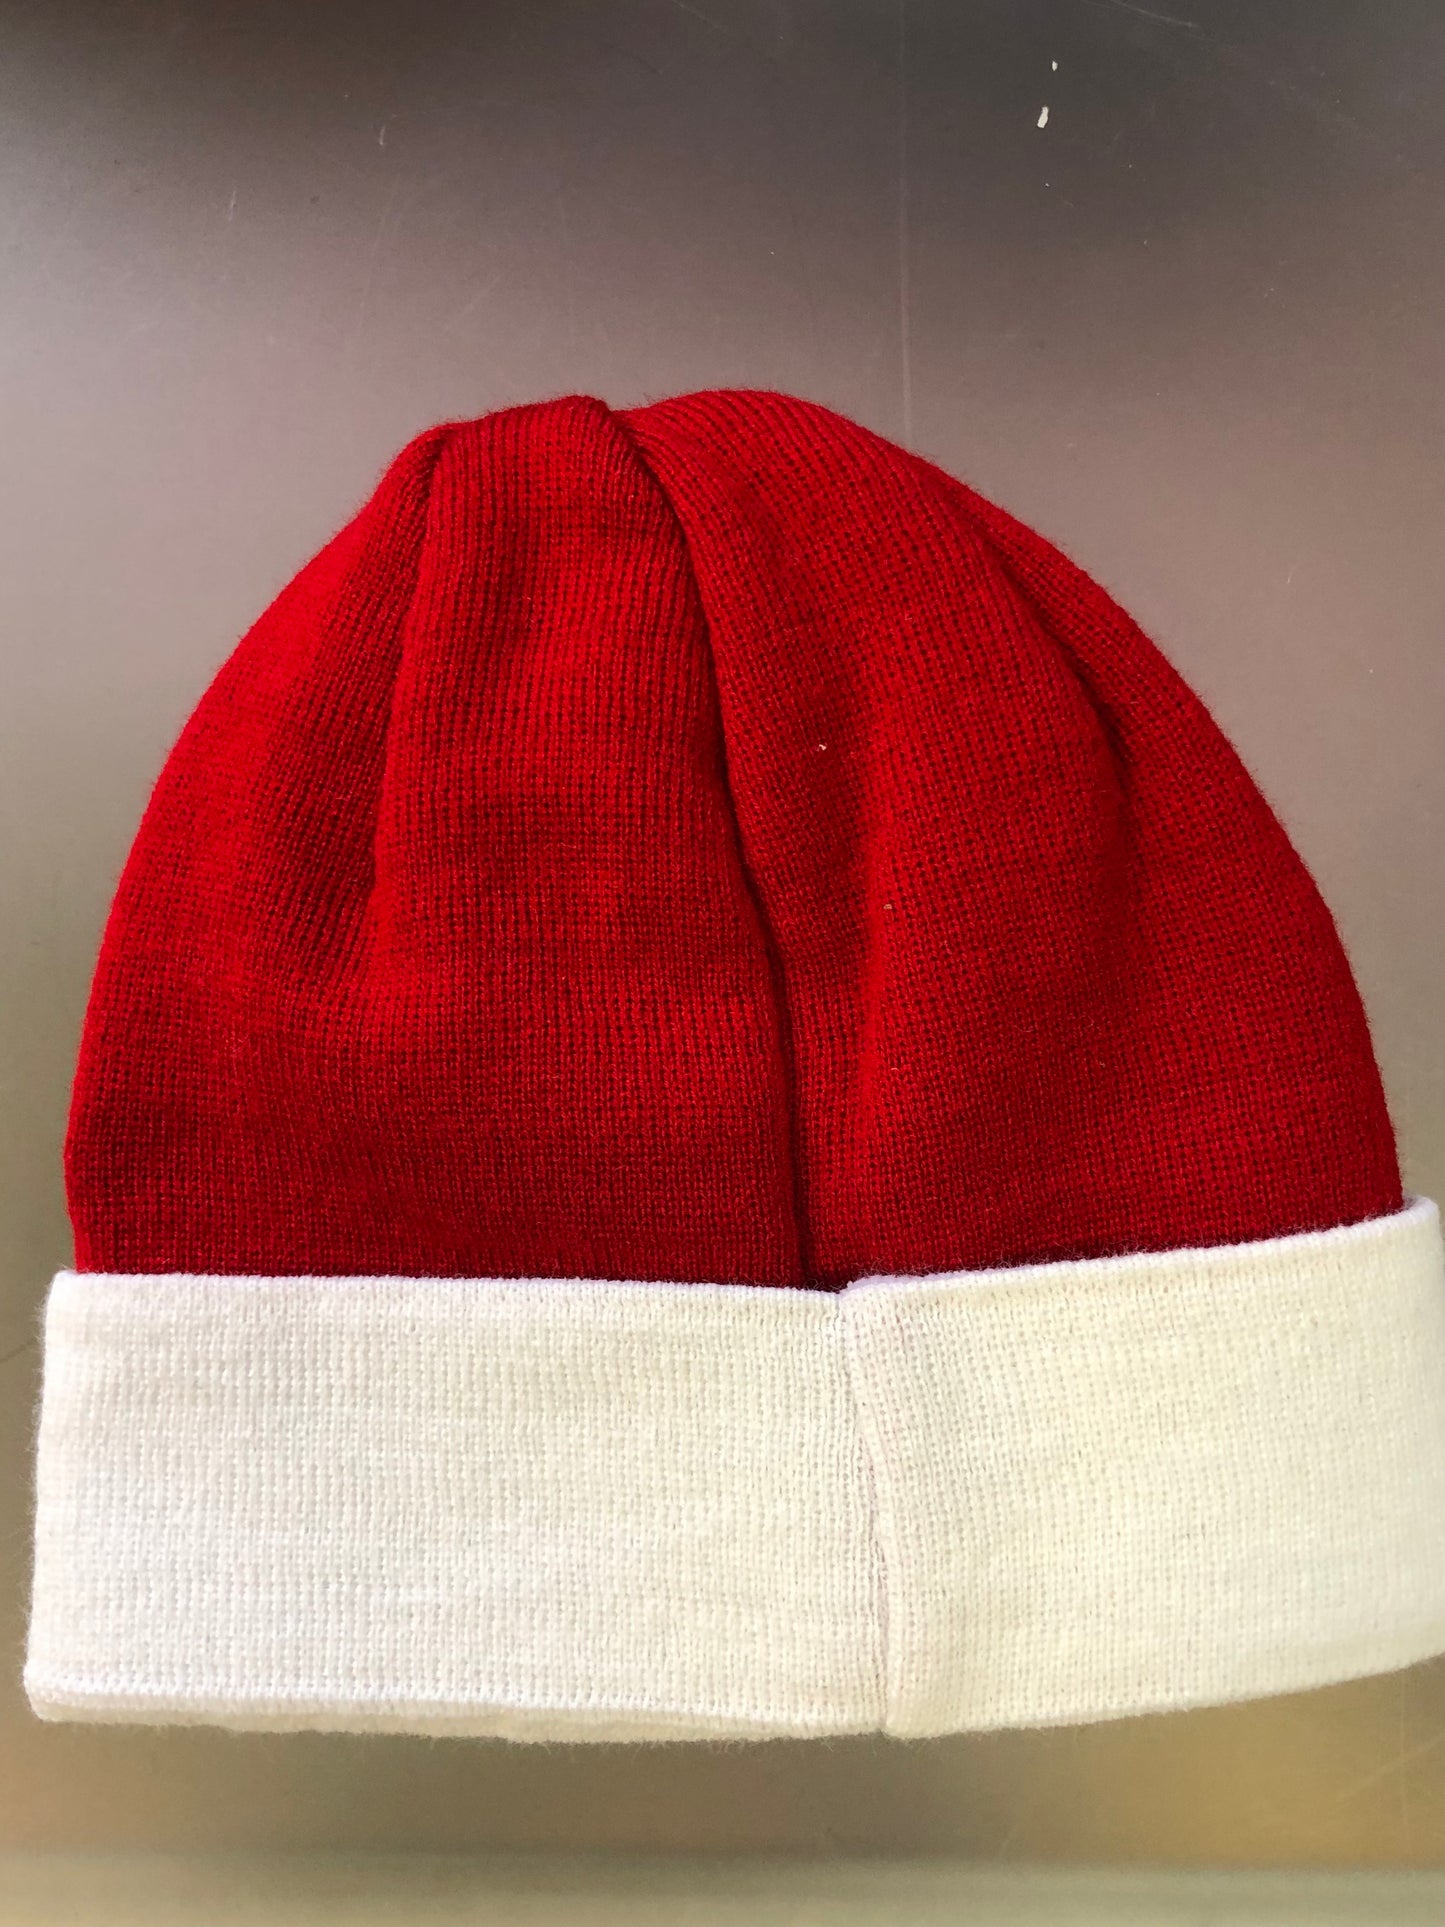 Polish Polska  2Knit Winter Hat -RED /White With  Eagle- Made in Poland